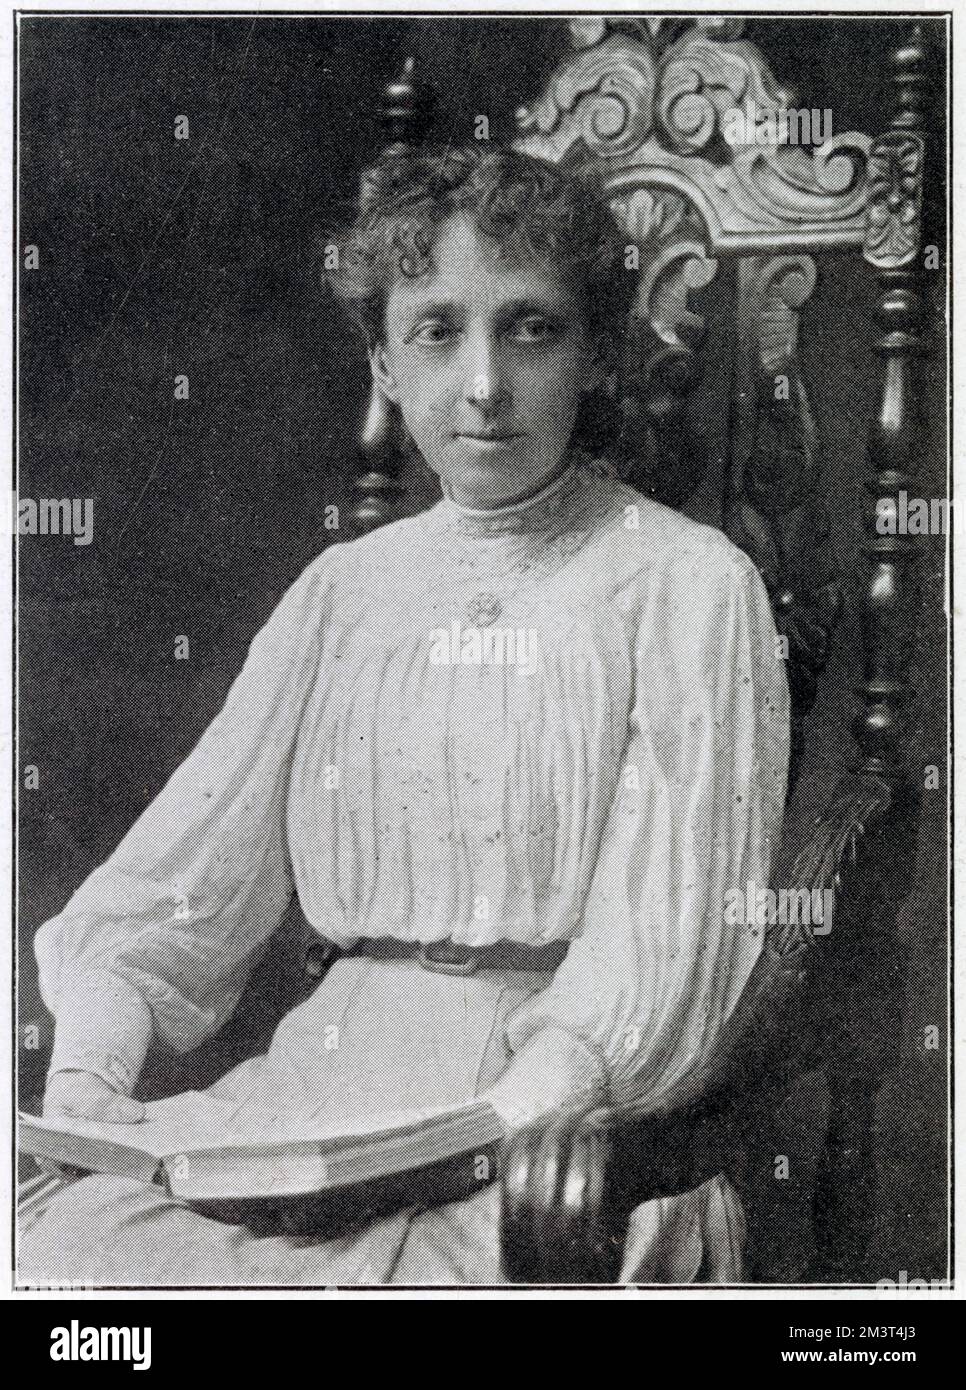 Helen Carte Boulter (born Susan Helen Couper Black; 1852 - 1913), also known as Helen Lenoir, British businesswoman known for her diplomatic skills and grasp of detail. Beginning as his secretary, and later marrying, impresario and hotelier Richard D'Oyly Carte, she is best remembered for her stewardship of the D'Oyly Carte Opera Company and Savoy Hotel from the end of the 19th century into the early 20th century.    Born in Wigtown, Scotland, she attended the University of London from 1871–1874 and pursued brief teaching and acting careers. In 1877 she obtained employment with Richard D'Oyly Stock Photo